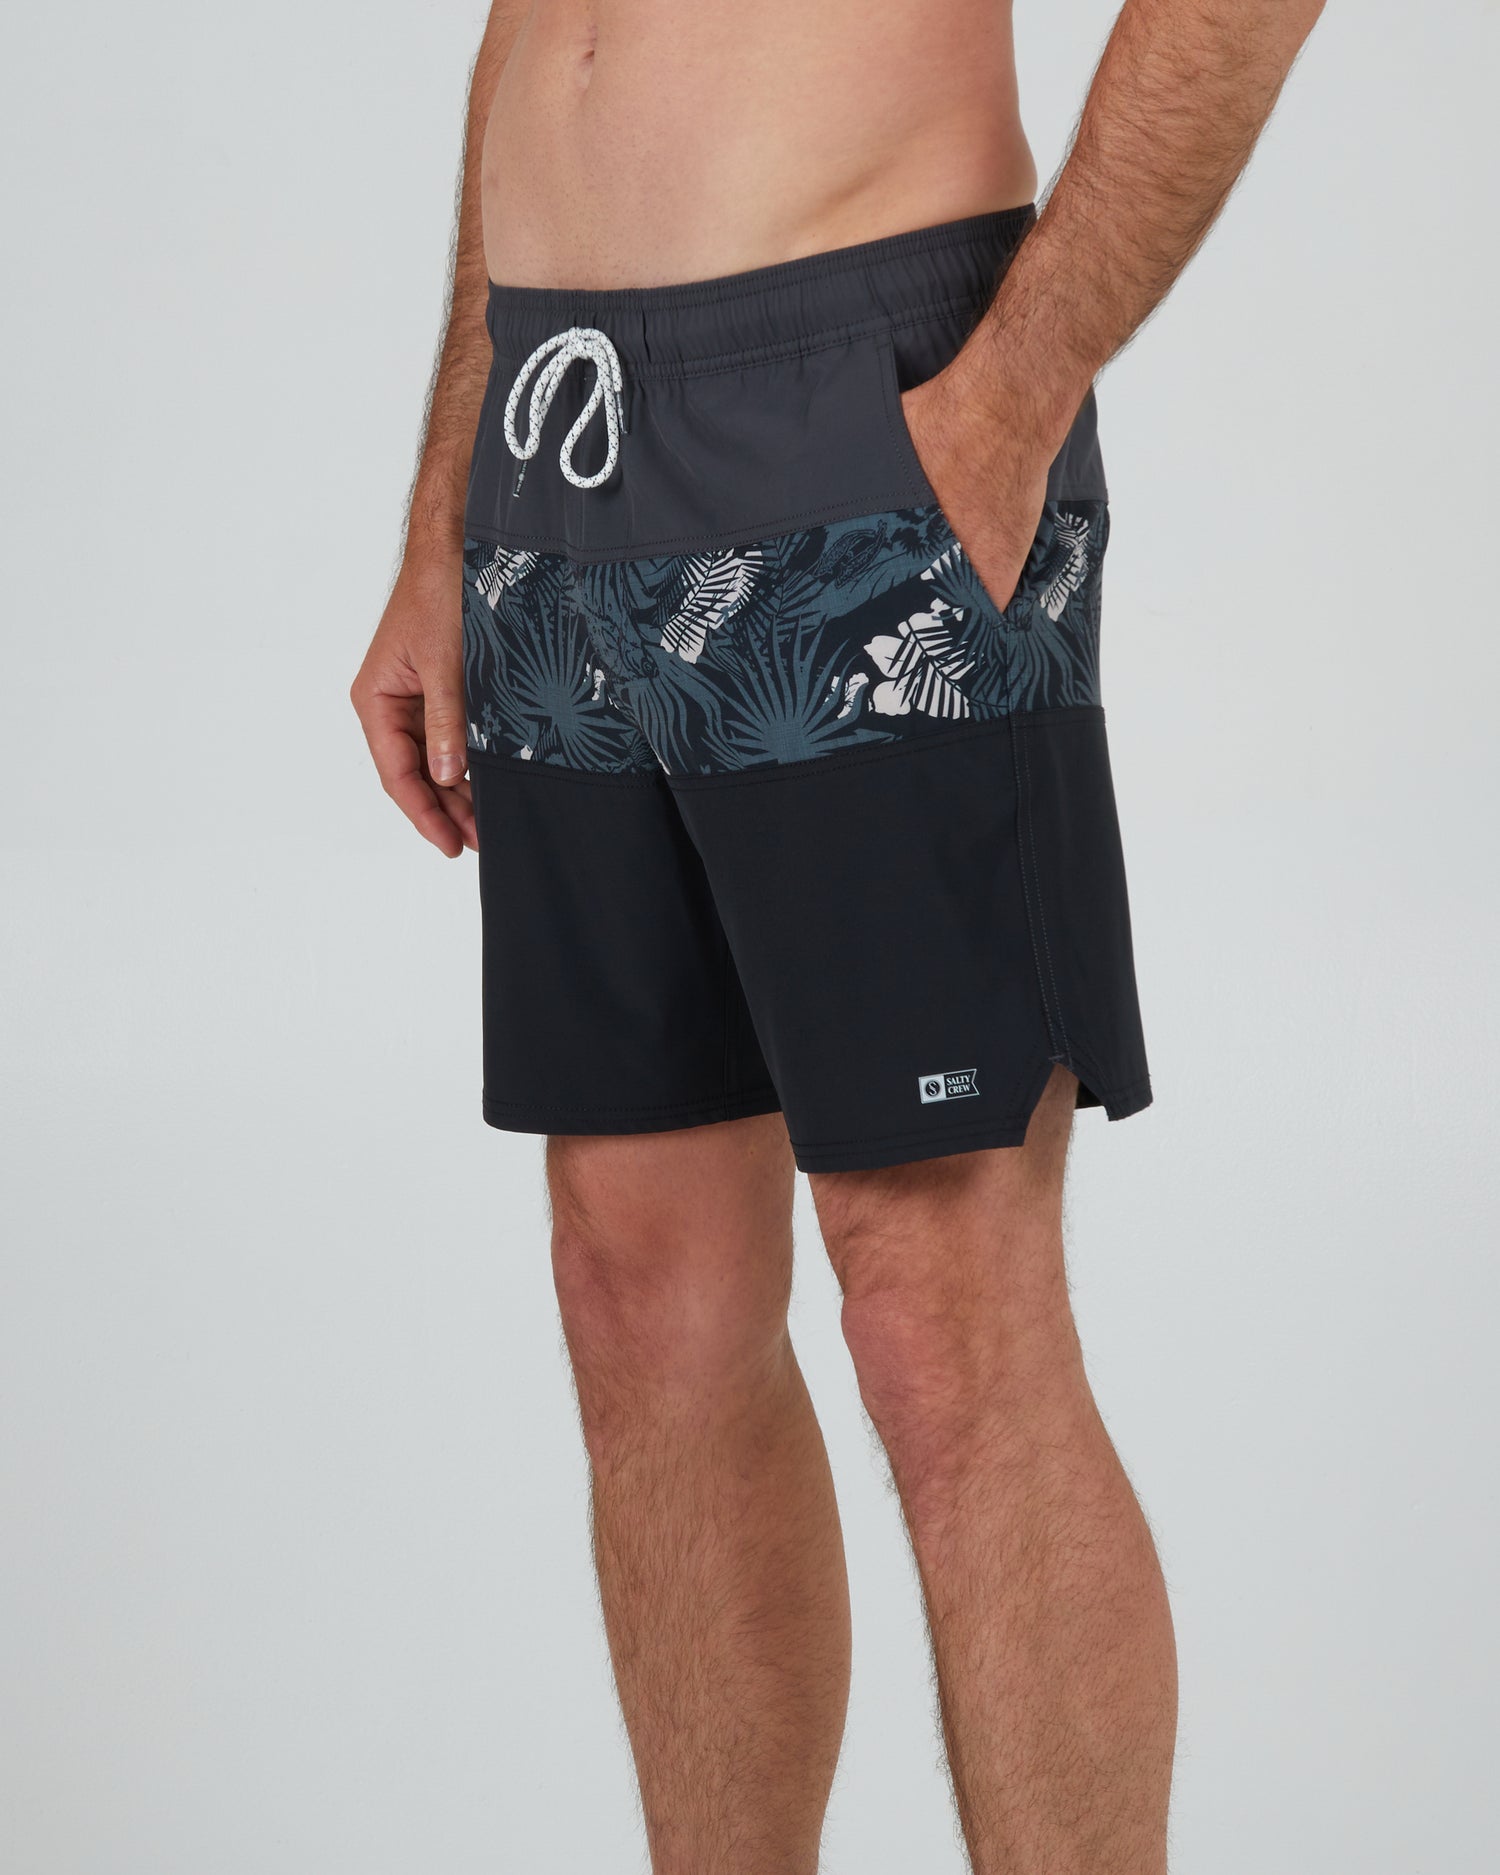 front angled view of Beacons 2 Charcoal Elastic Boardshort